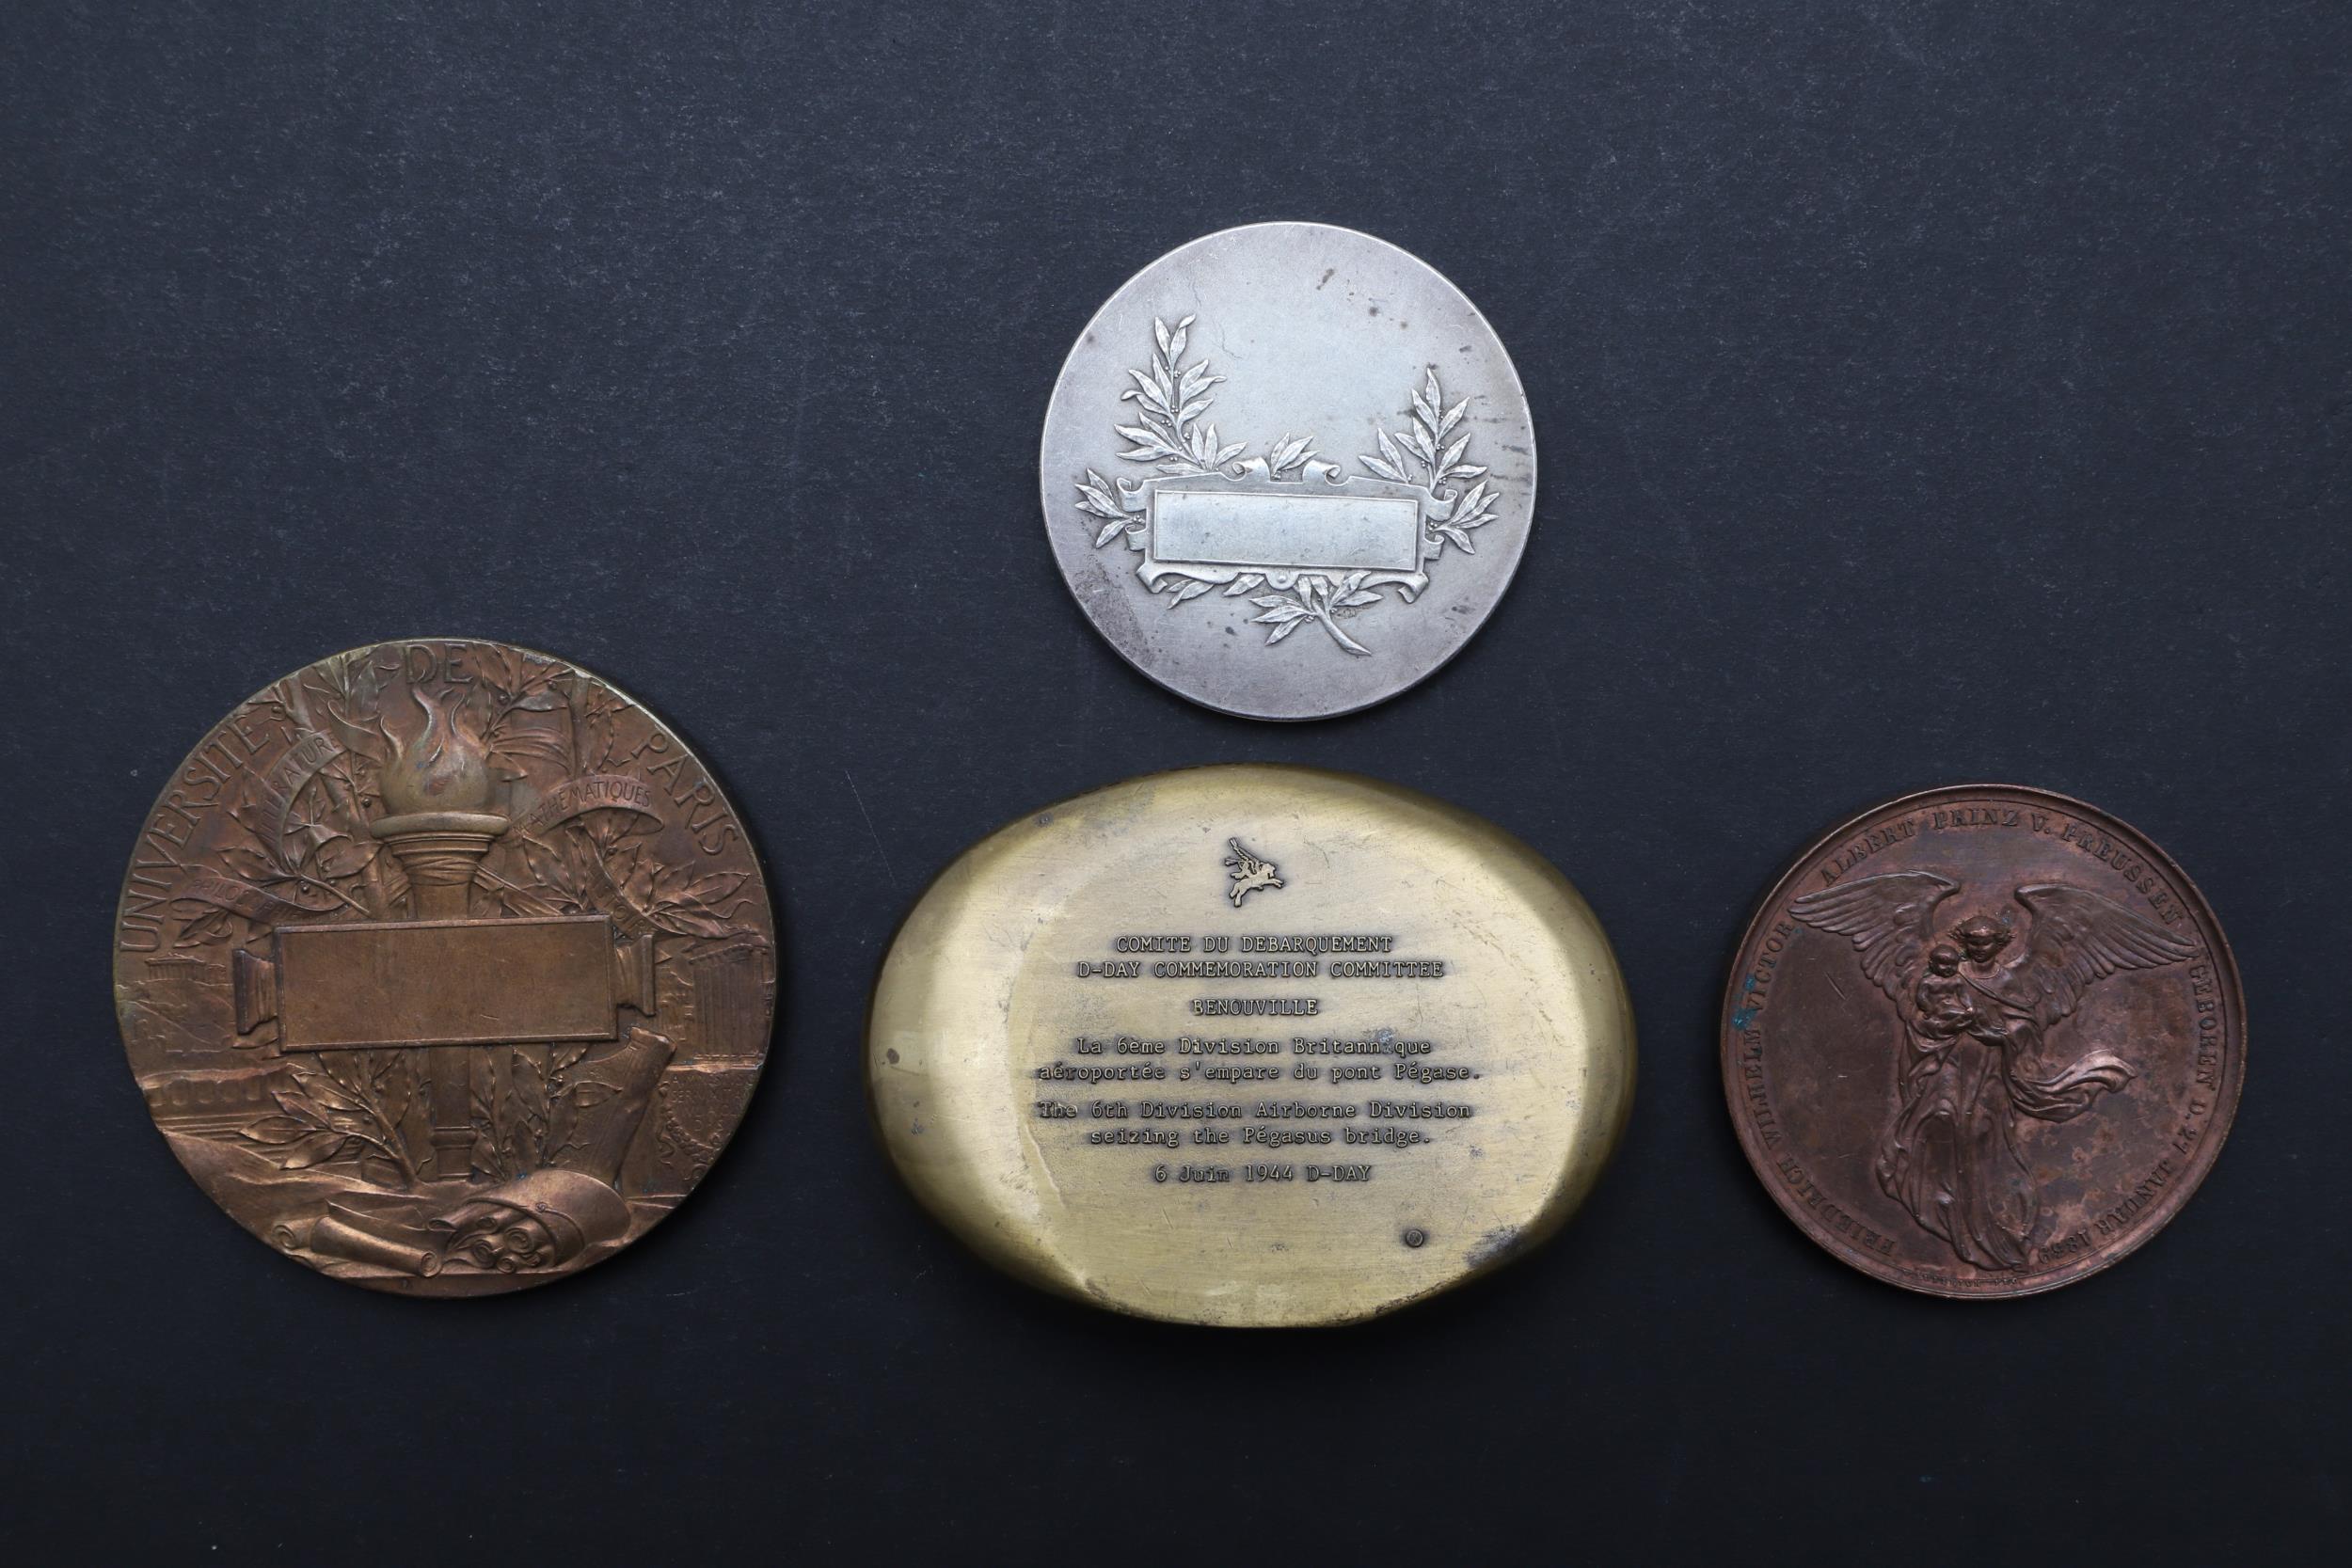 AN HISTORIC MEDAL COMMEMORATING THE BIRTH OF KAISER WILHELM II, AND THREE OTHERS. - Image 6 of 7